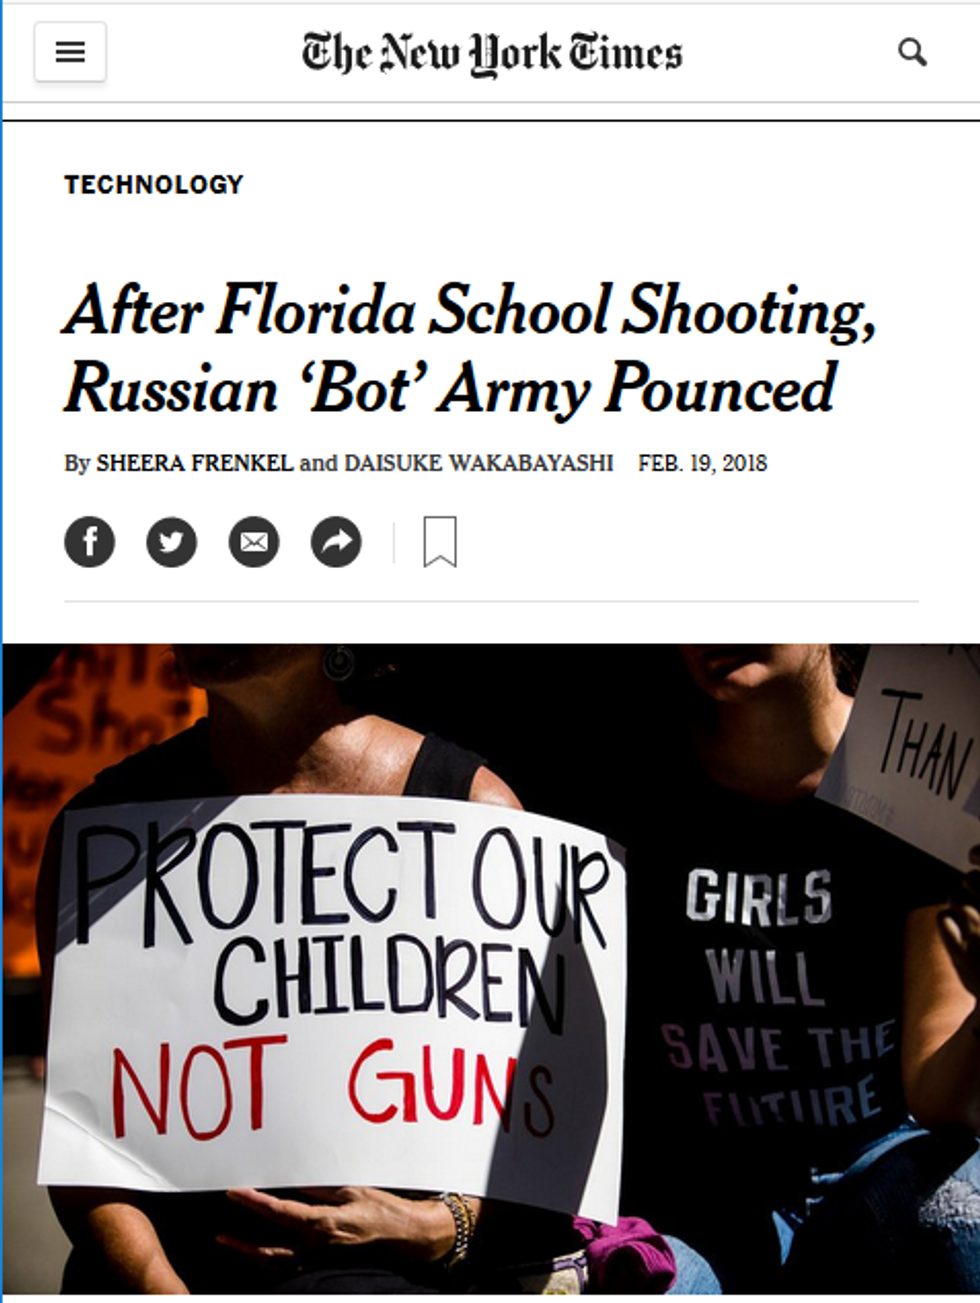 NYT: After Florida School Shooting, Russian Bot Army Pounced